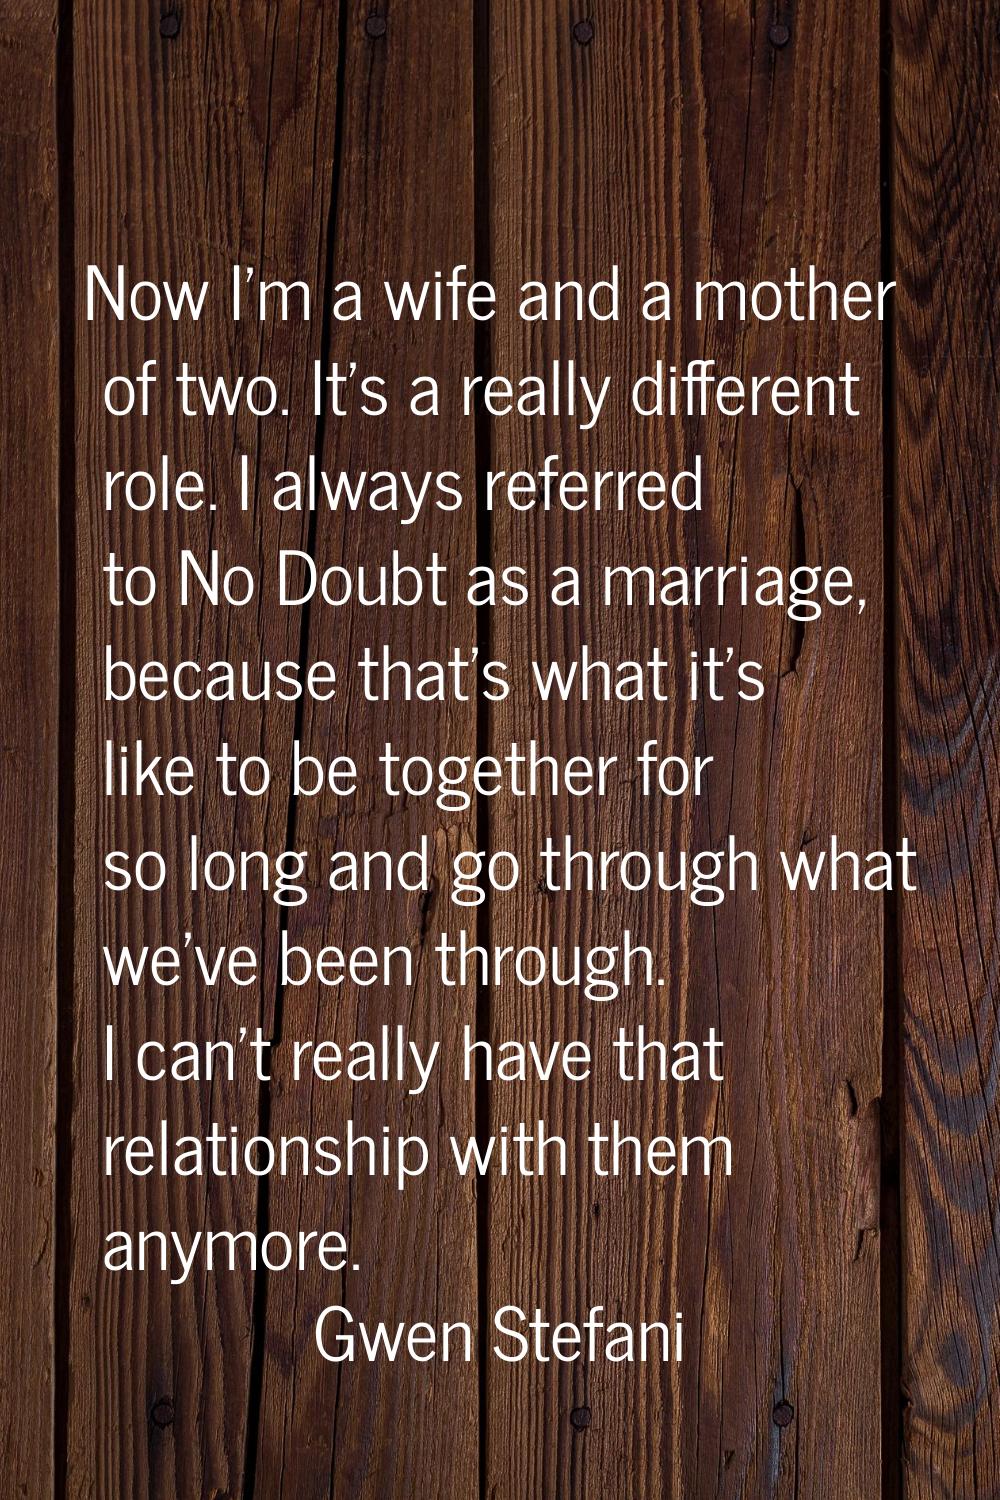 Now I'm a wife and a mother of two. It's a really different role. I always referred to No Doubt as 